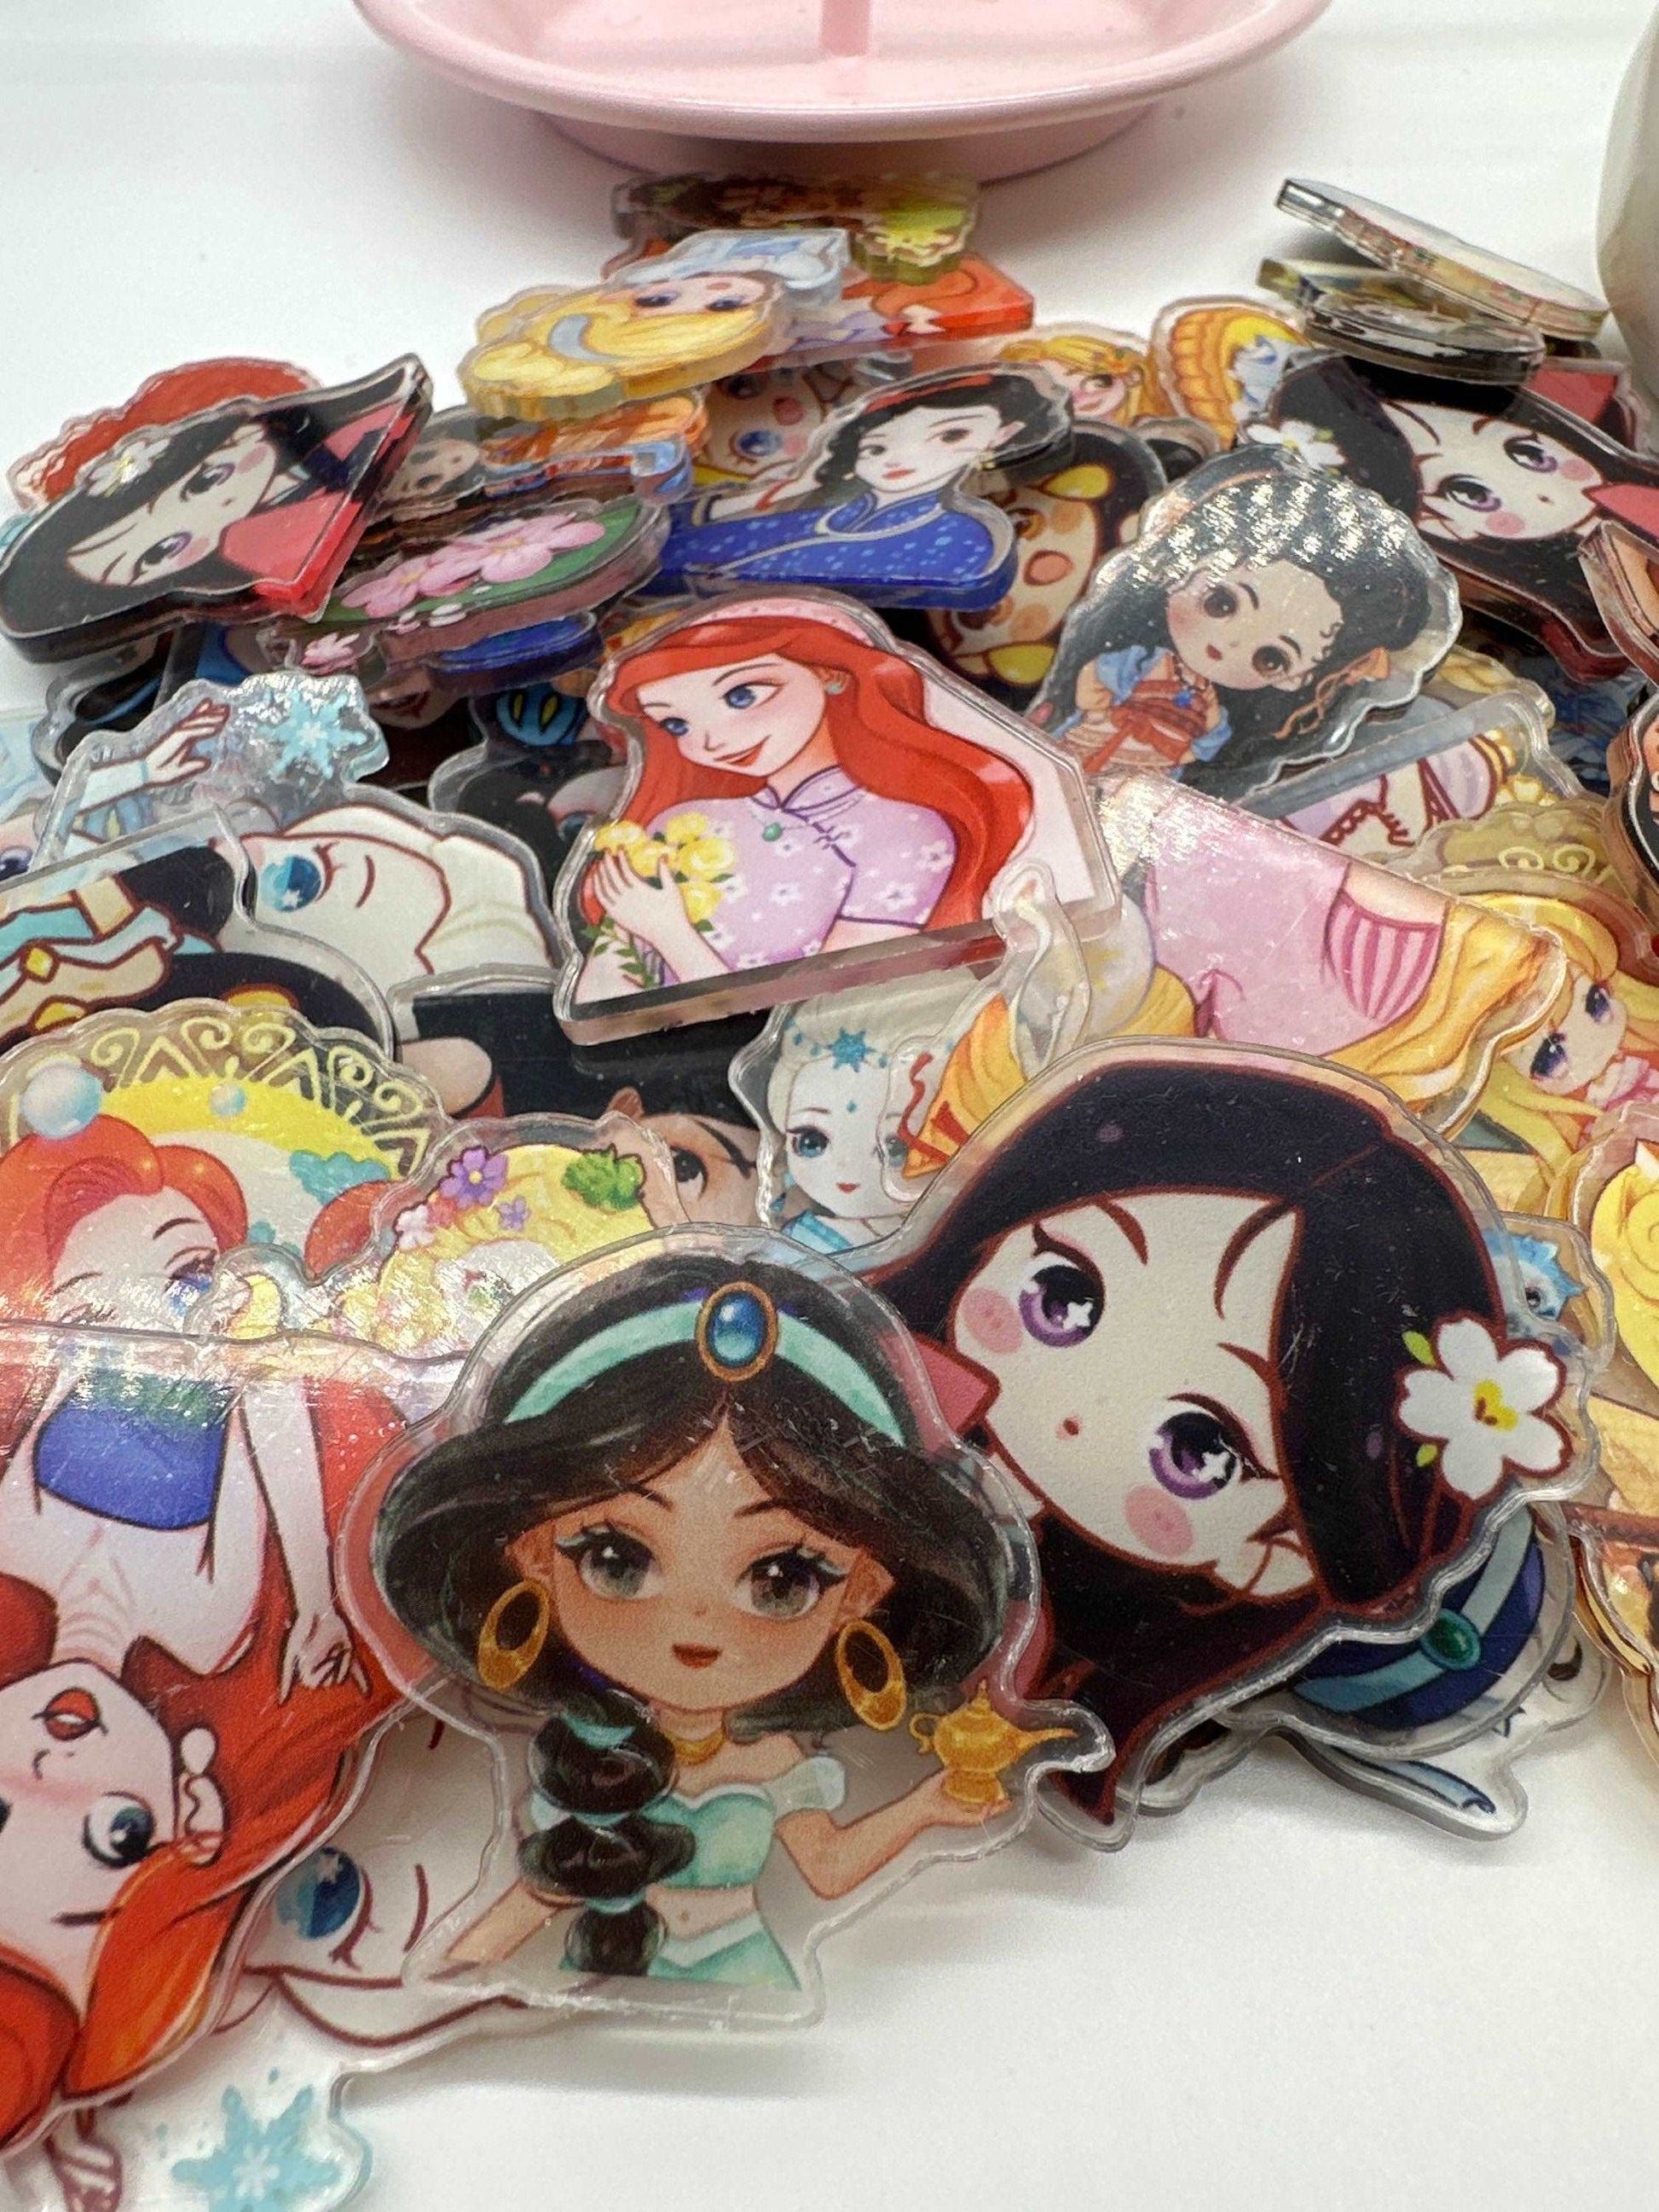 Mystery bag of Acrylic Charms for DIY, Make Keychains, Decorate paperclips,Princess theme Random no pick 10 pieces